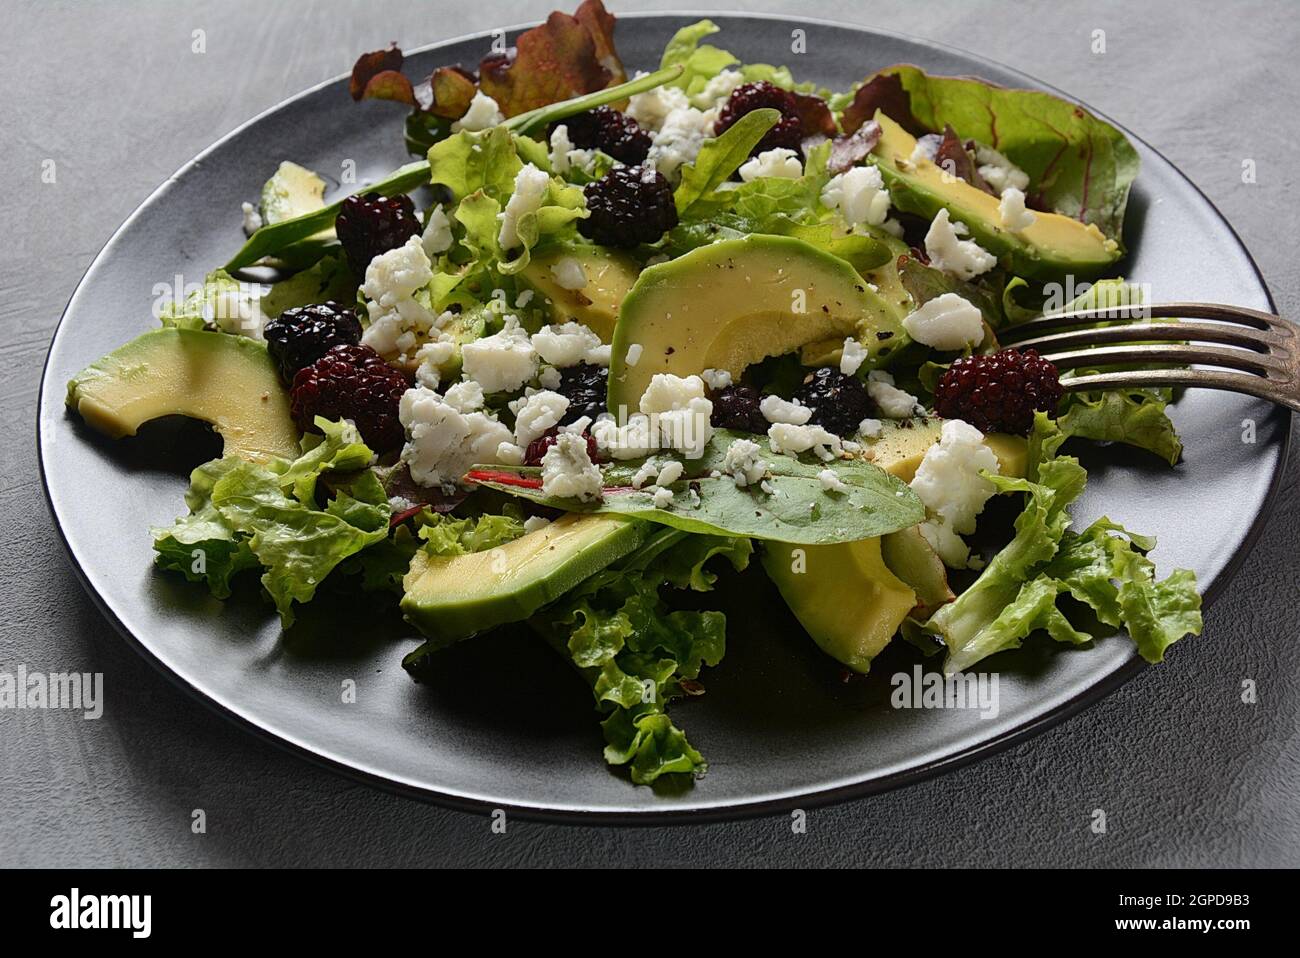 Avocado salad with lettuce, blackberry, blue cheese, olive oil and ...